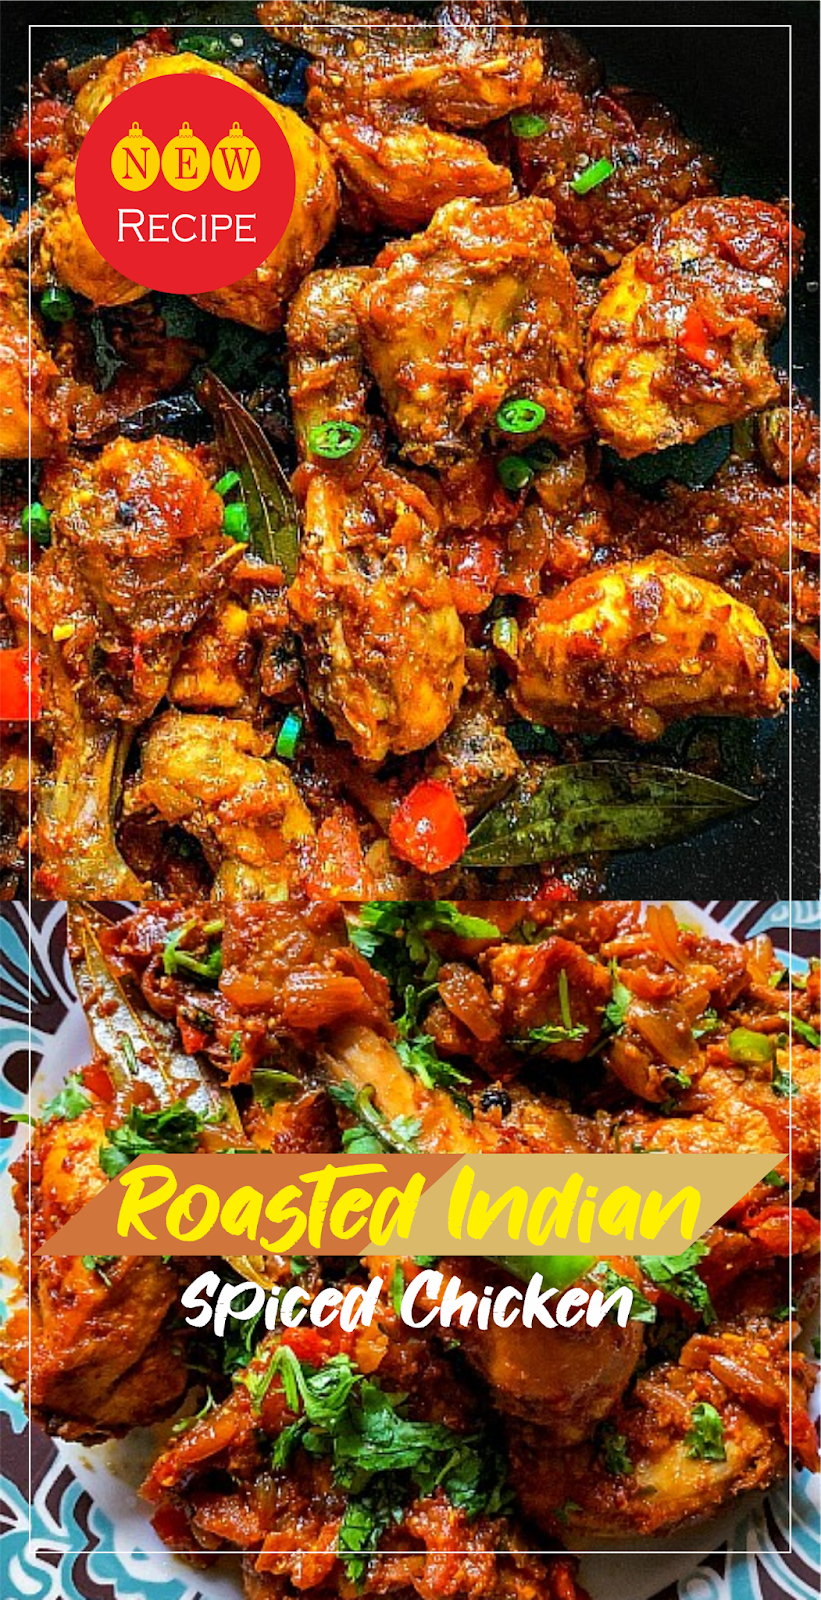 Roasted Indian Spiced Chicken Recipe | Amzing Food